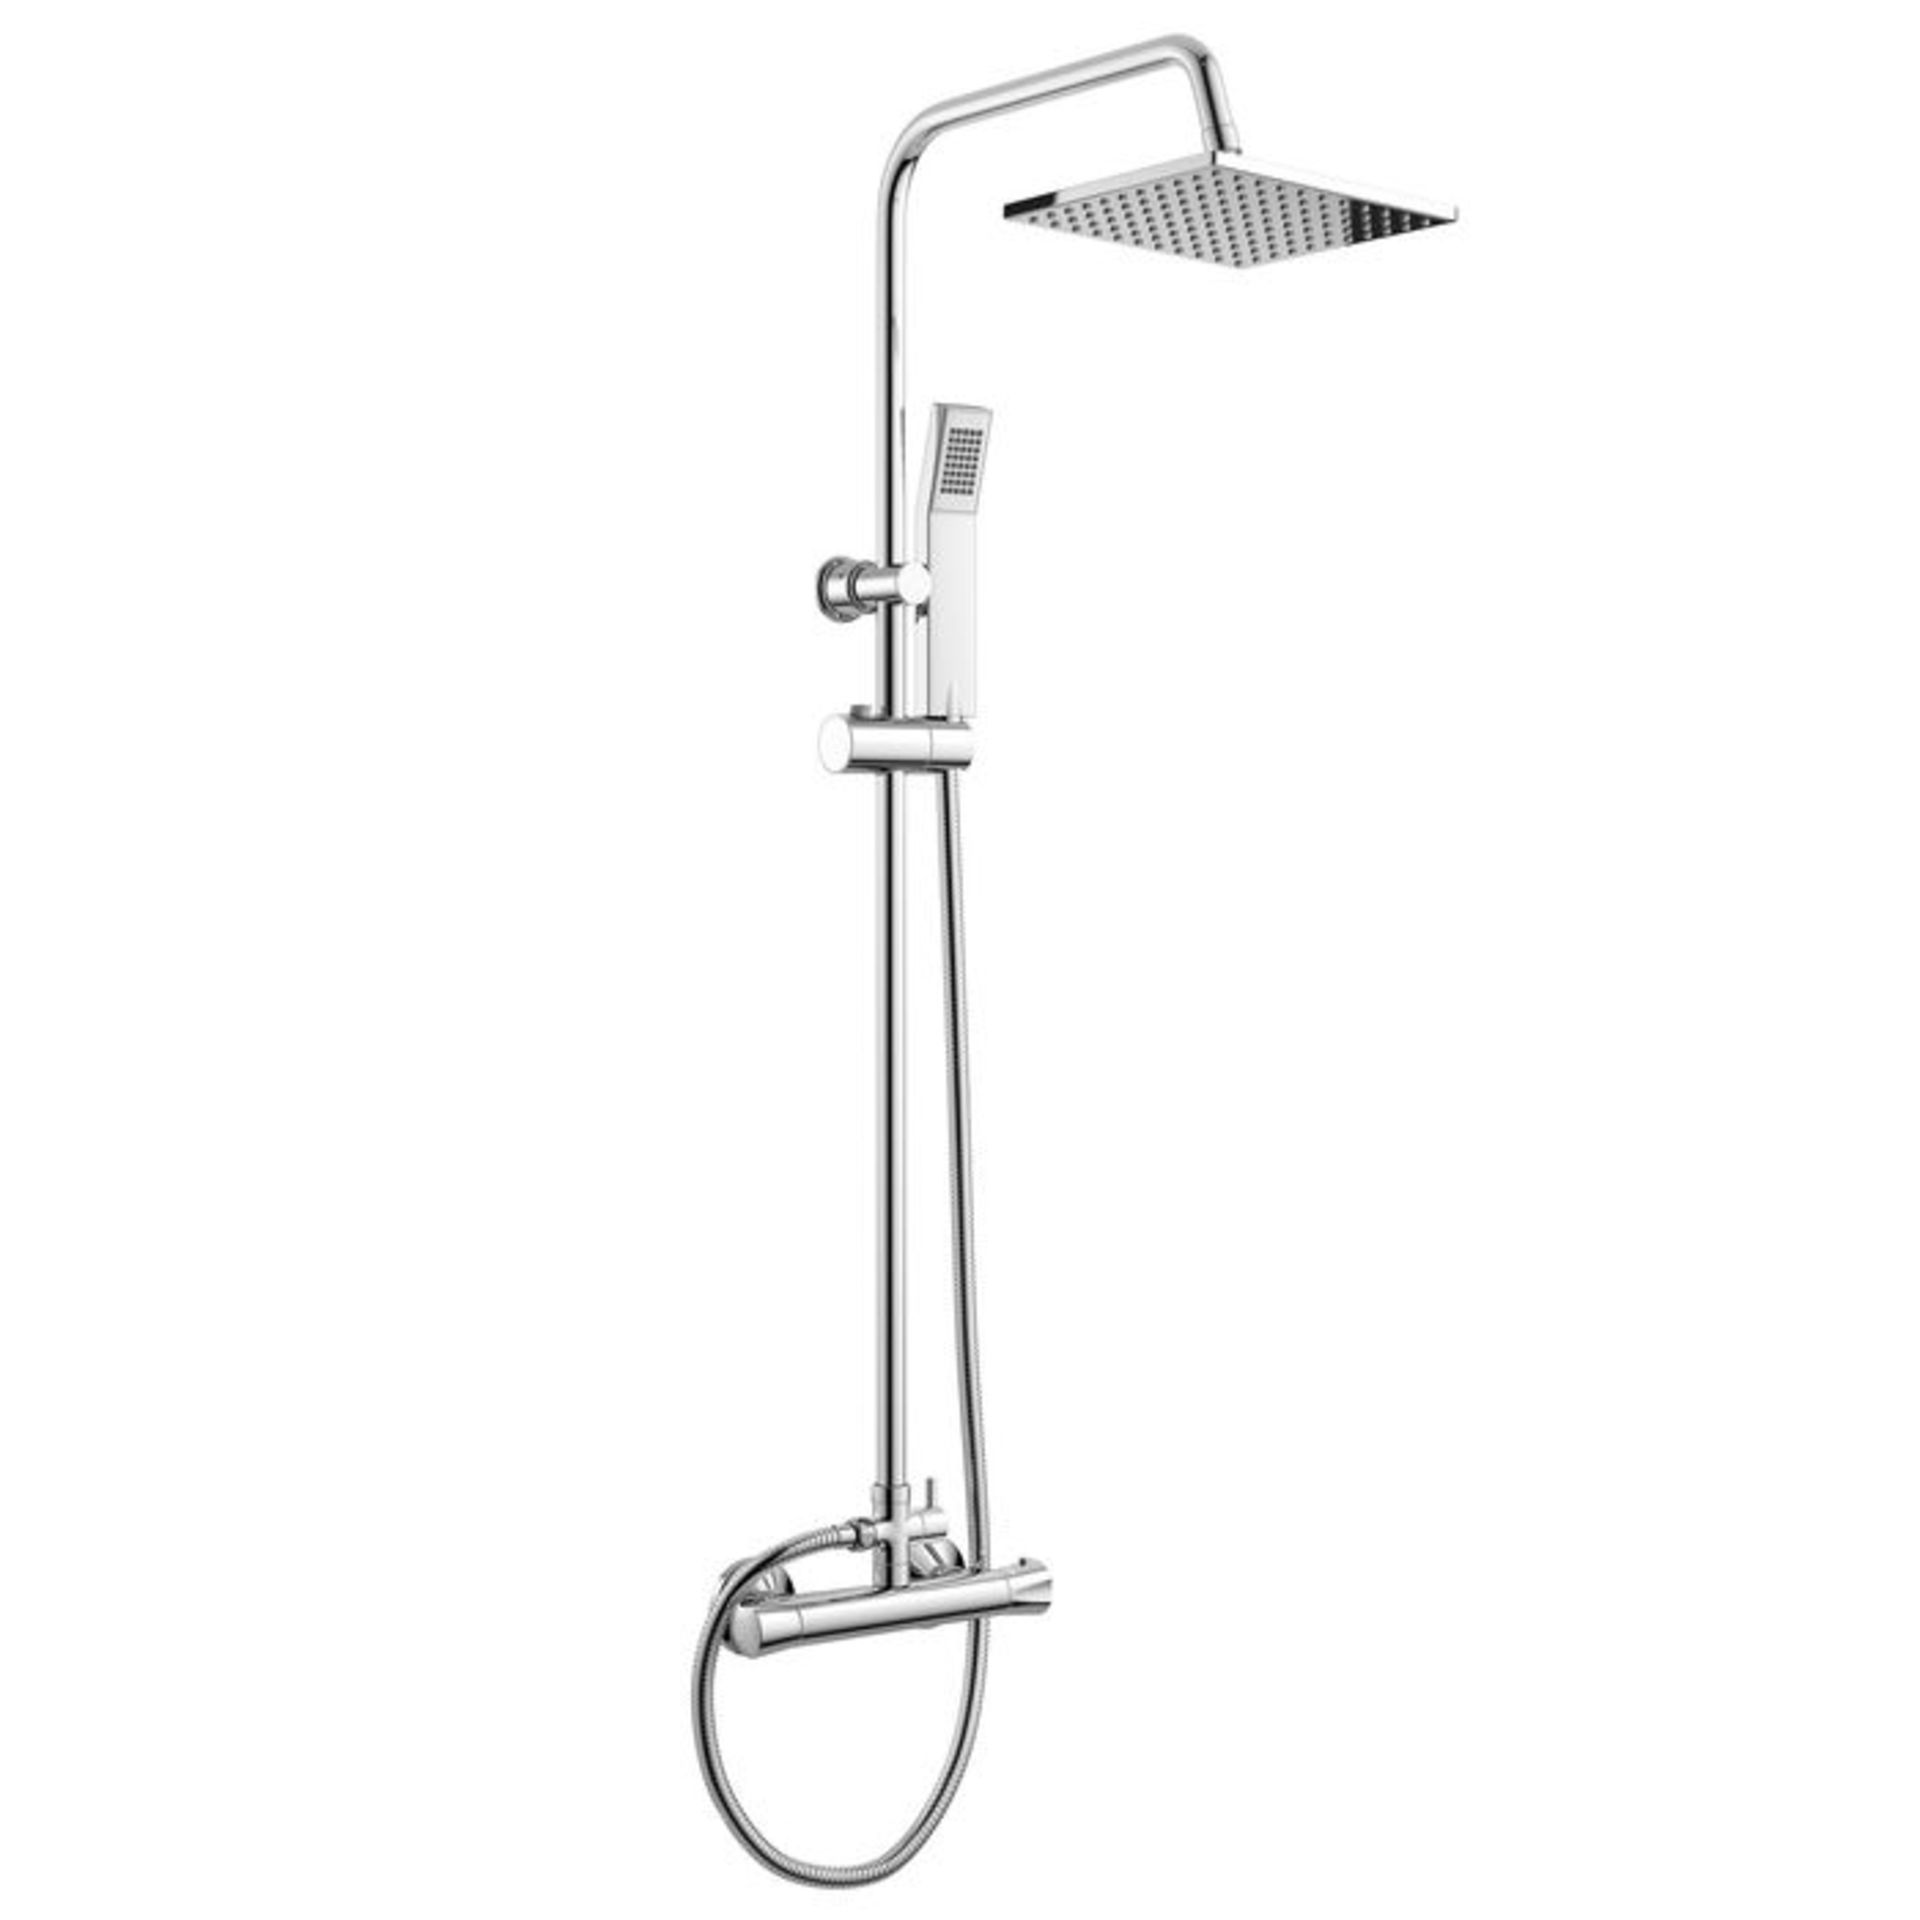 (A38) 200mm Square Head Thermostatic Exposed Shower Kit Hand Held. We love this because it